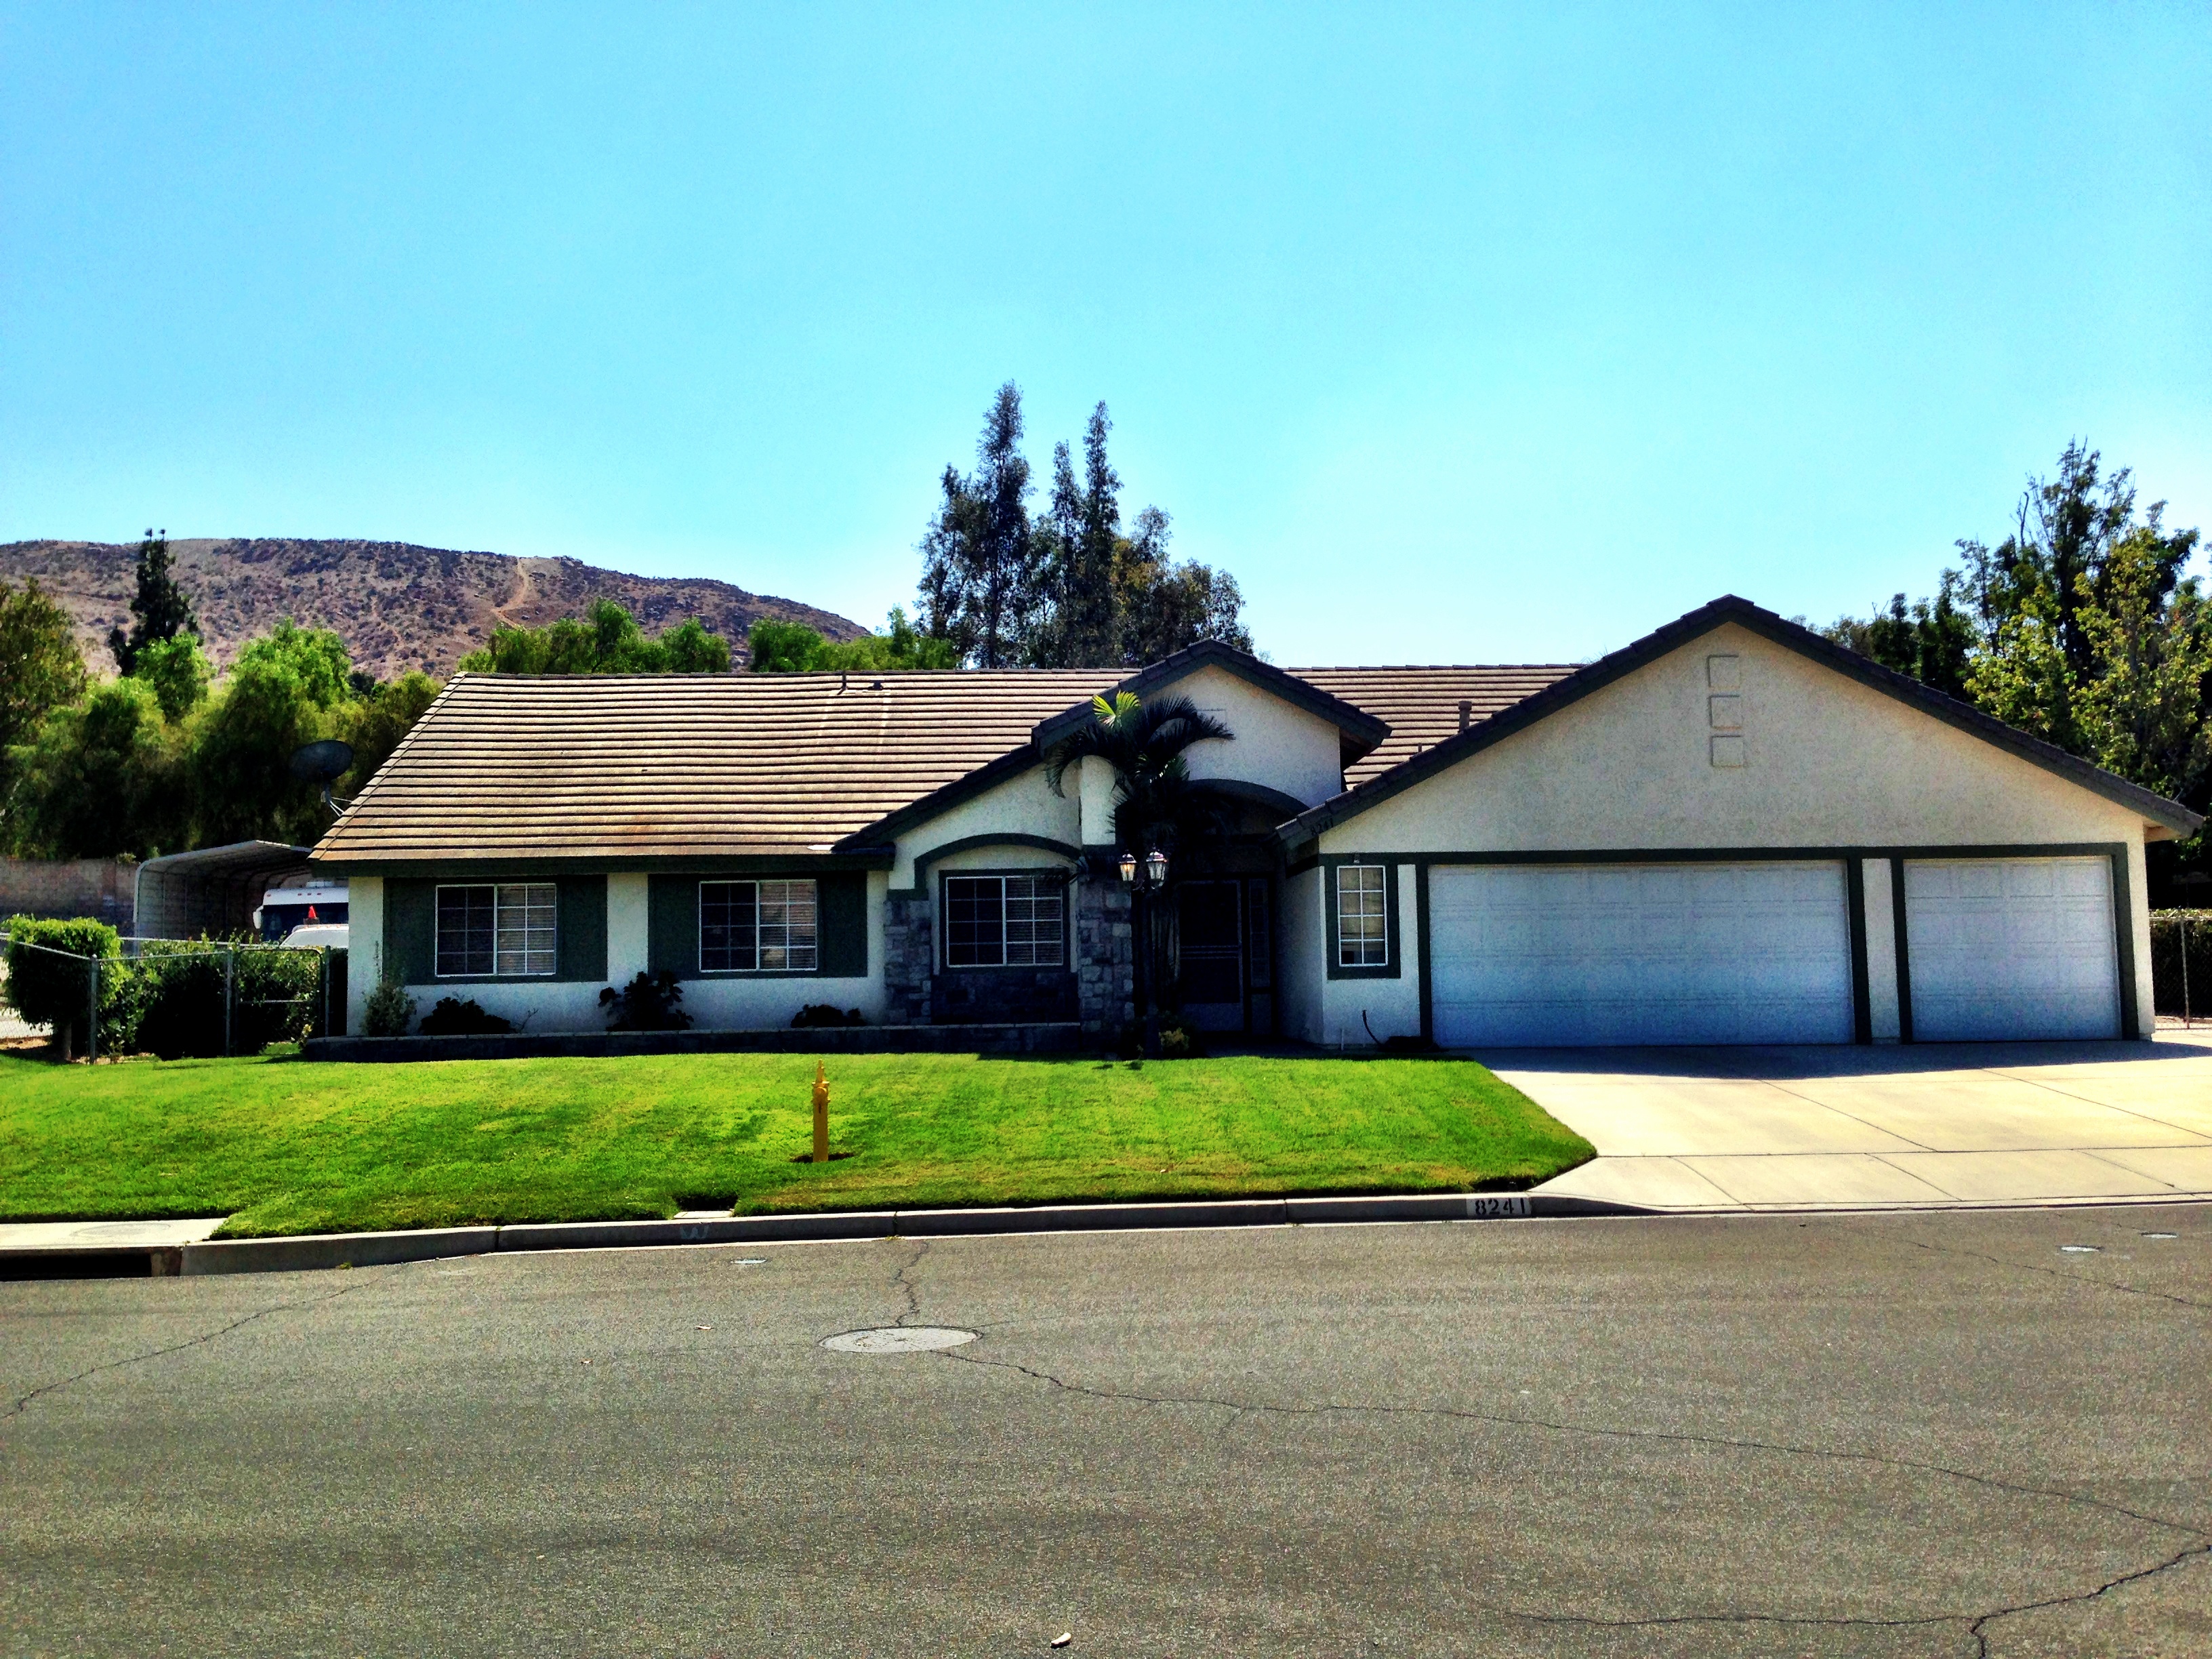 Indian Hills Home for Sale - 8241 Stonemist Cr. Jurupa Valley, CA 92509